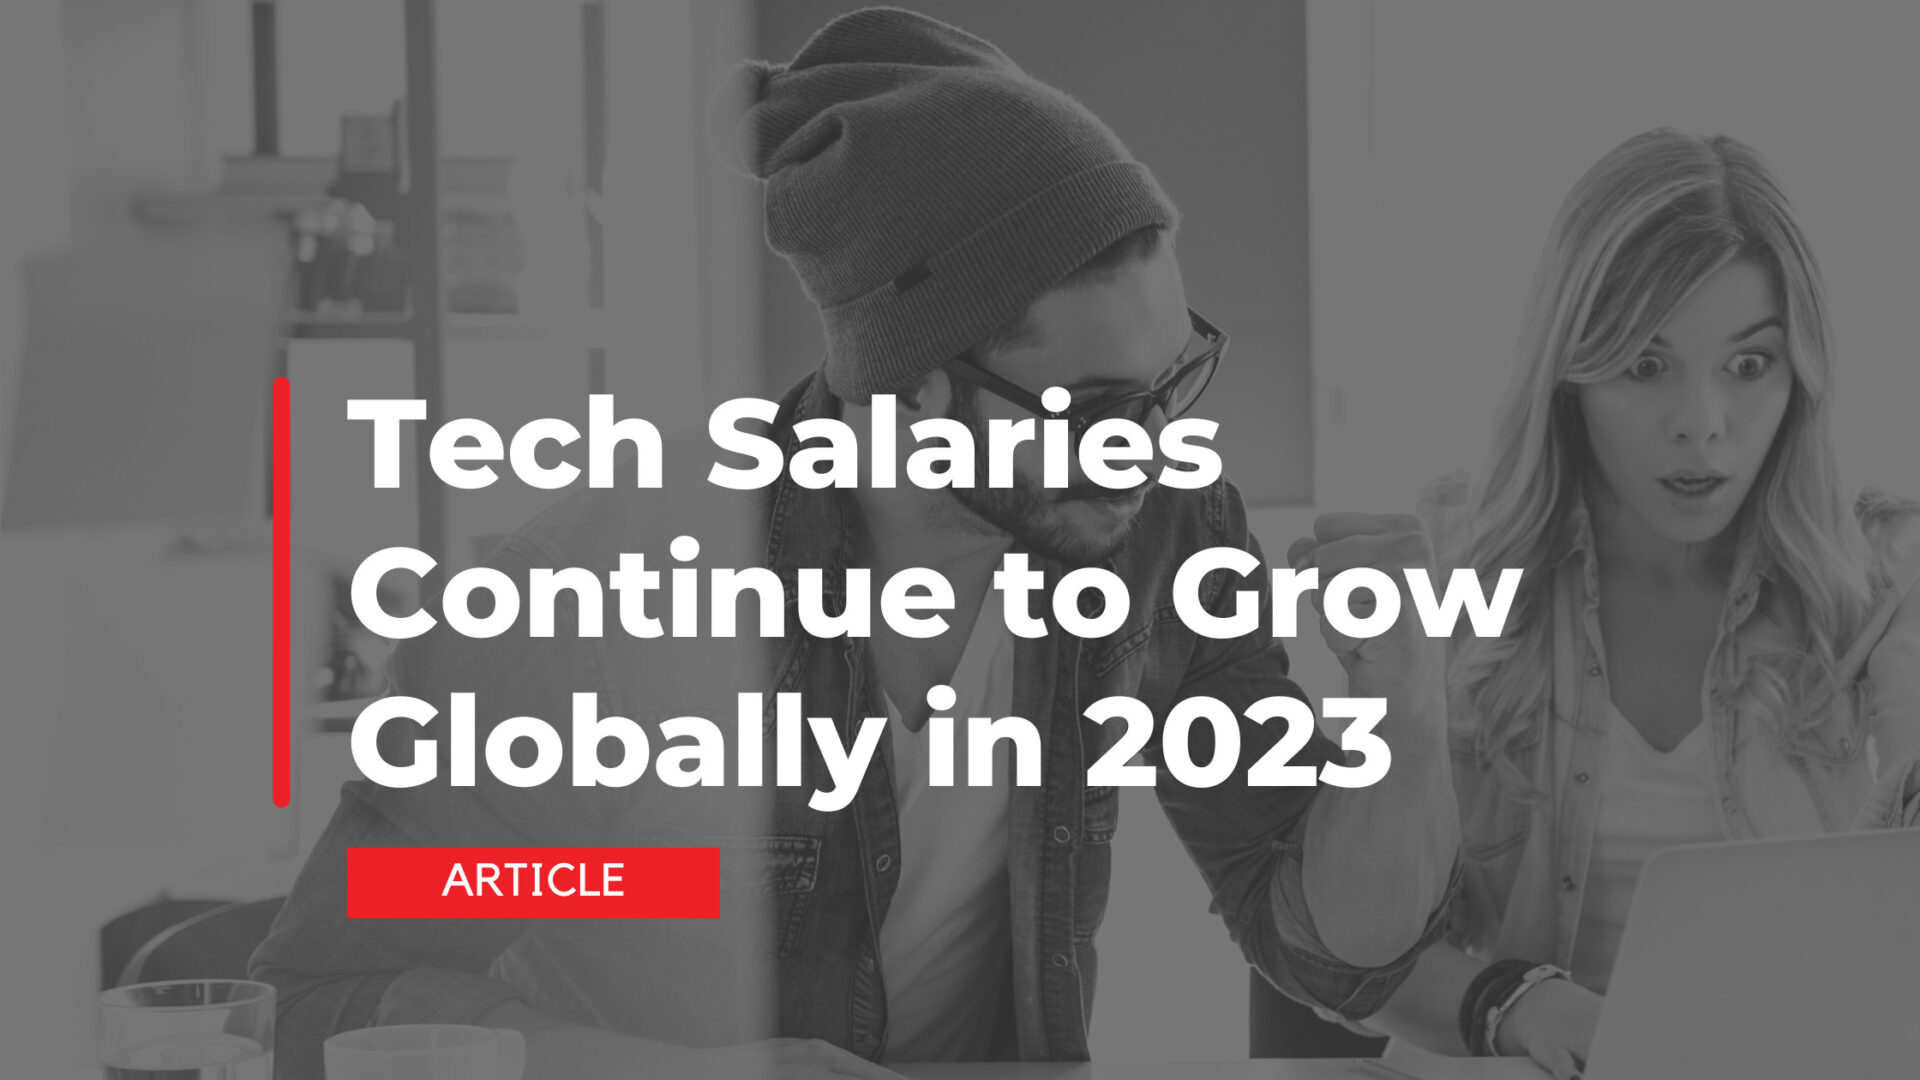 Tech Salaries Remain Strong and Continue to Grow Globally in 2023